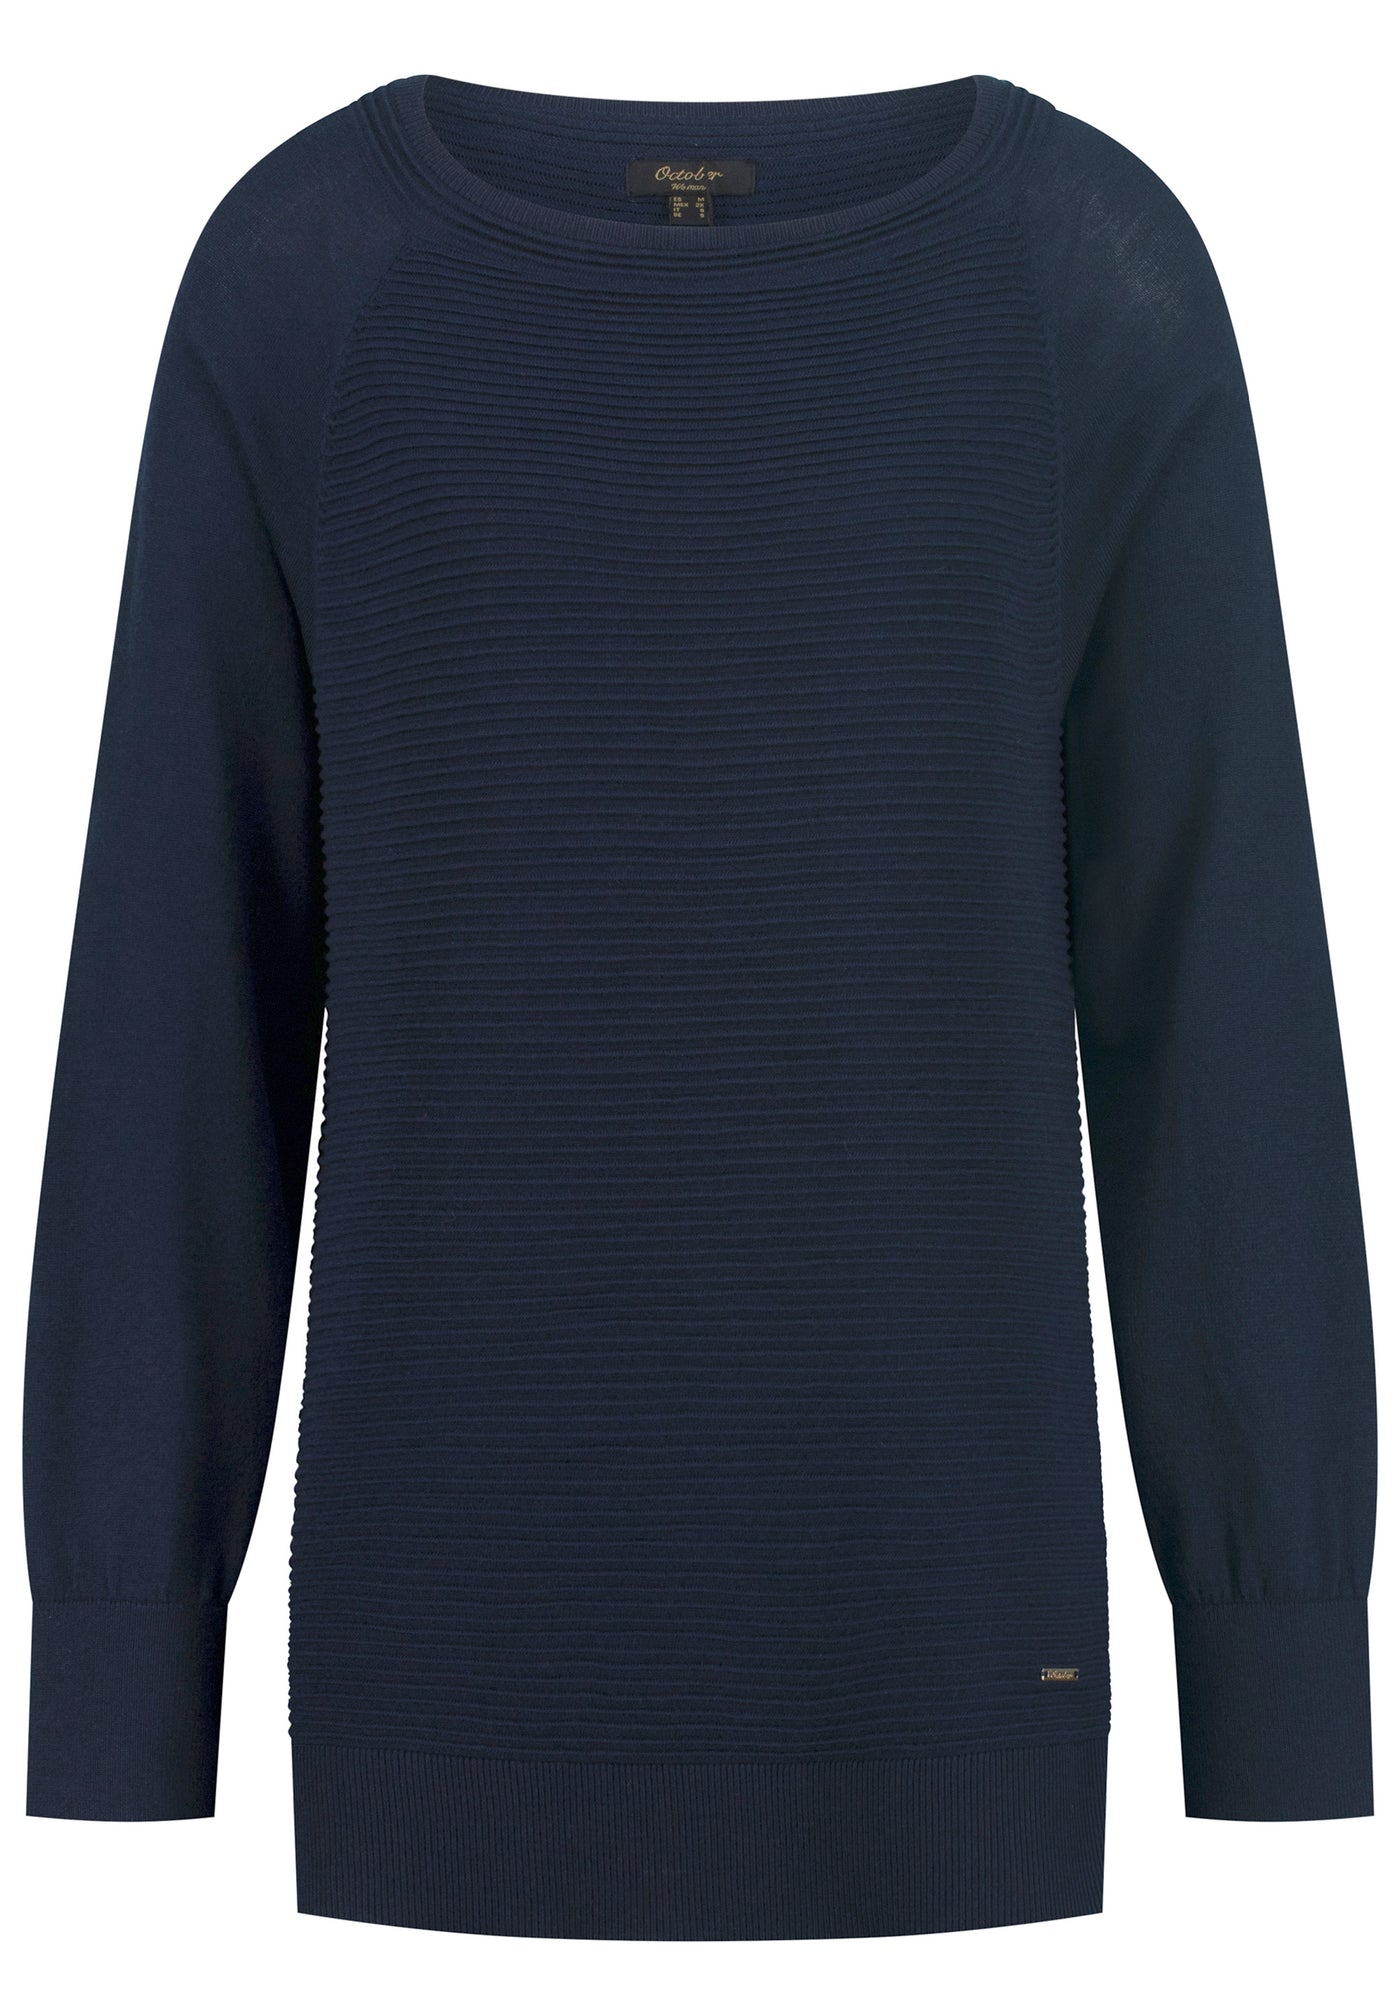 OTTOMAN SWEATER WITH SIDE OPENINGS DARK BLUE